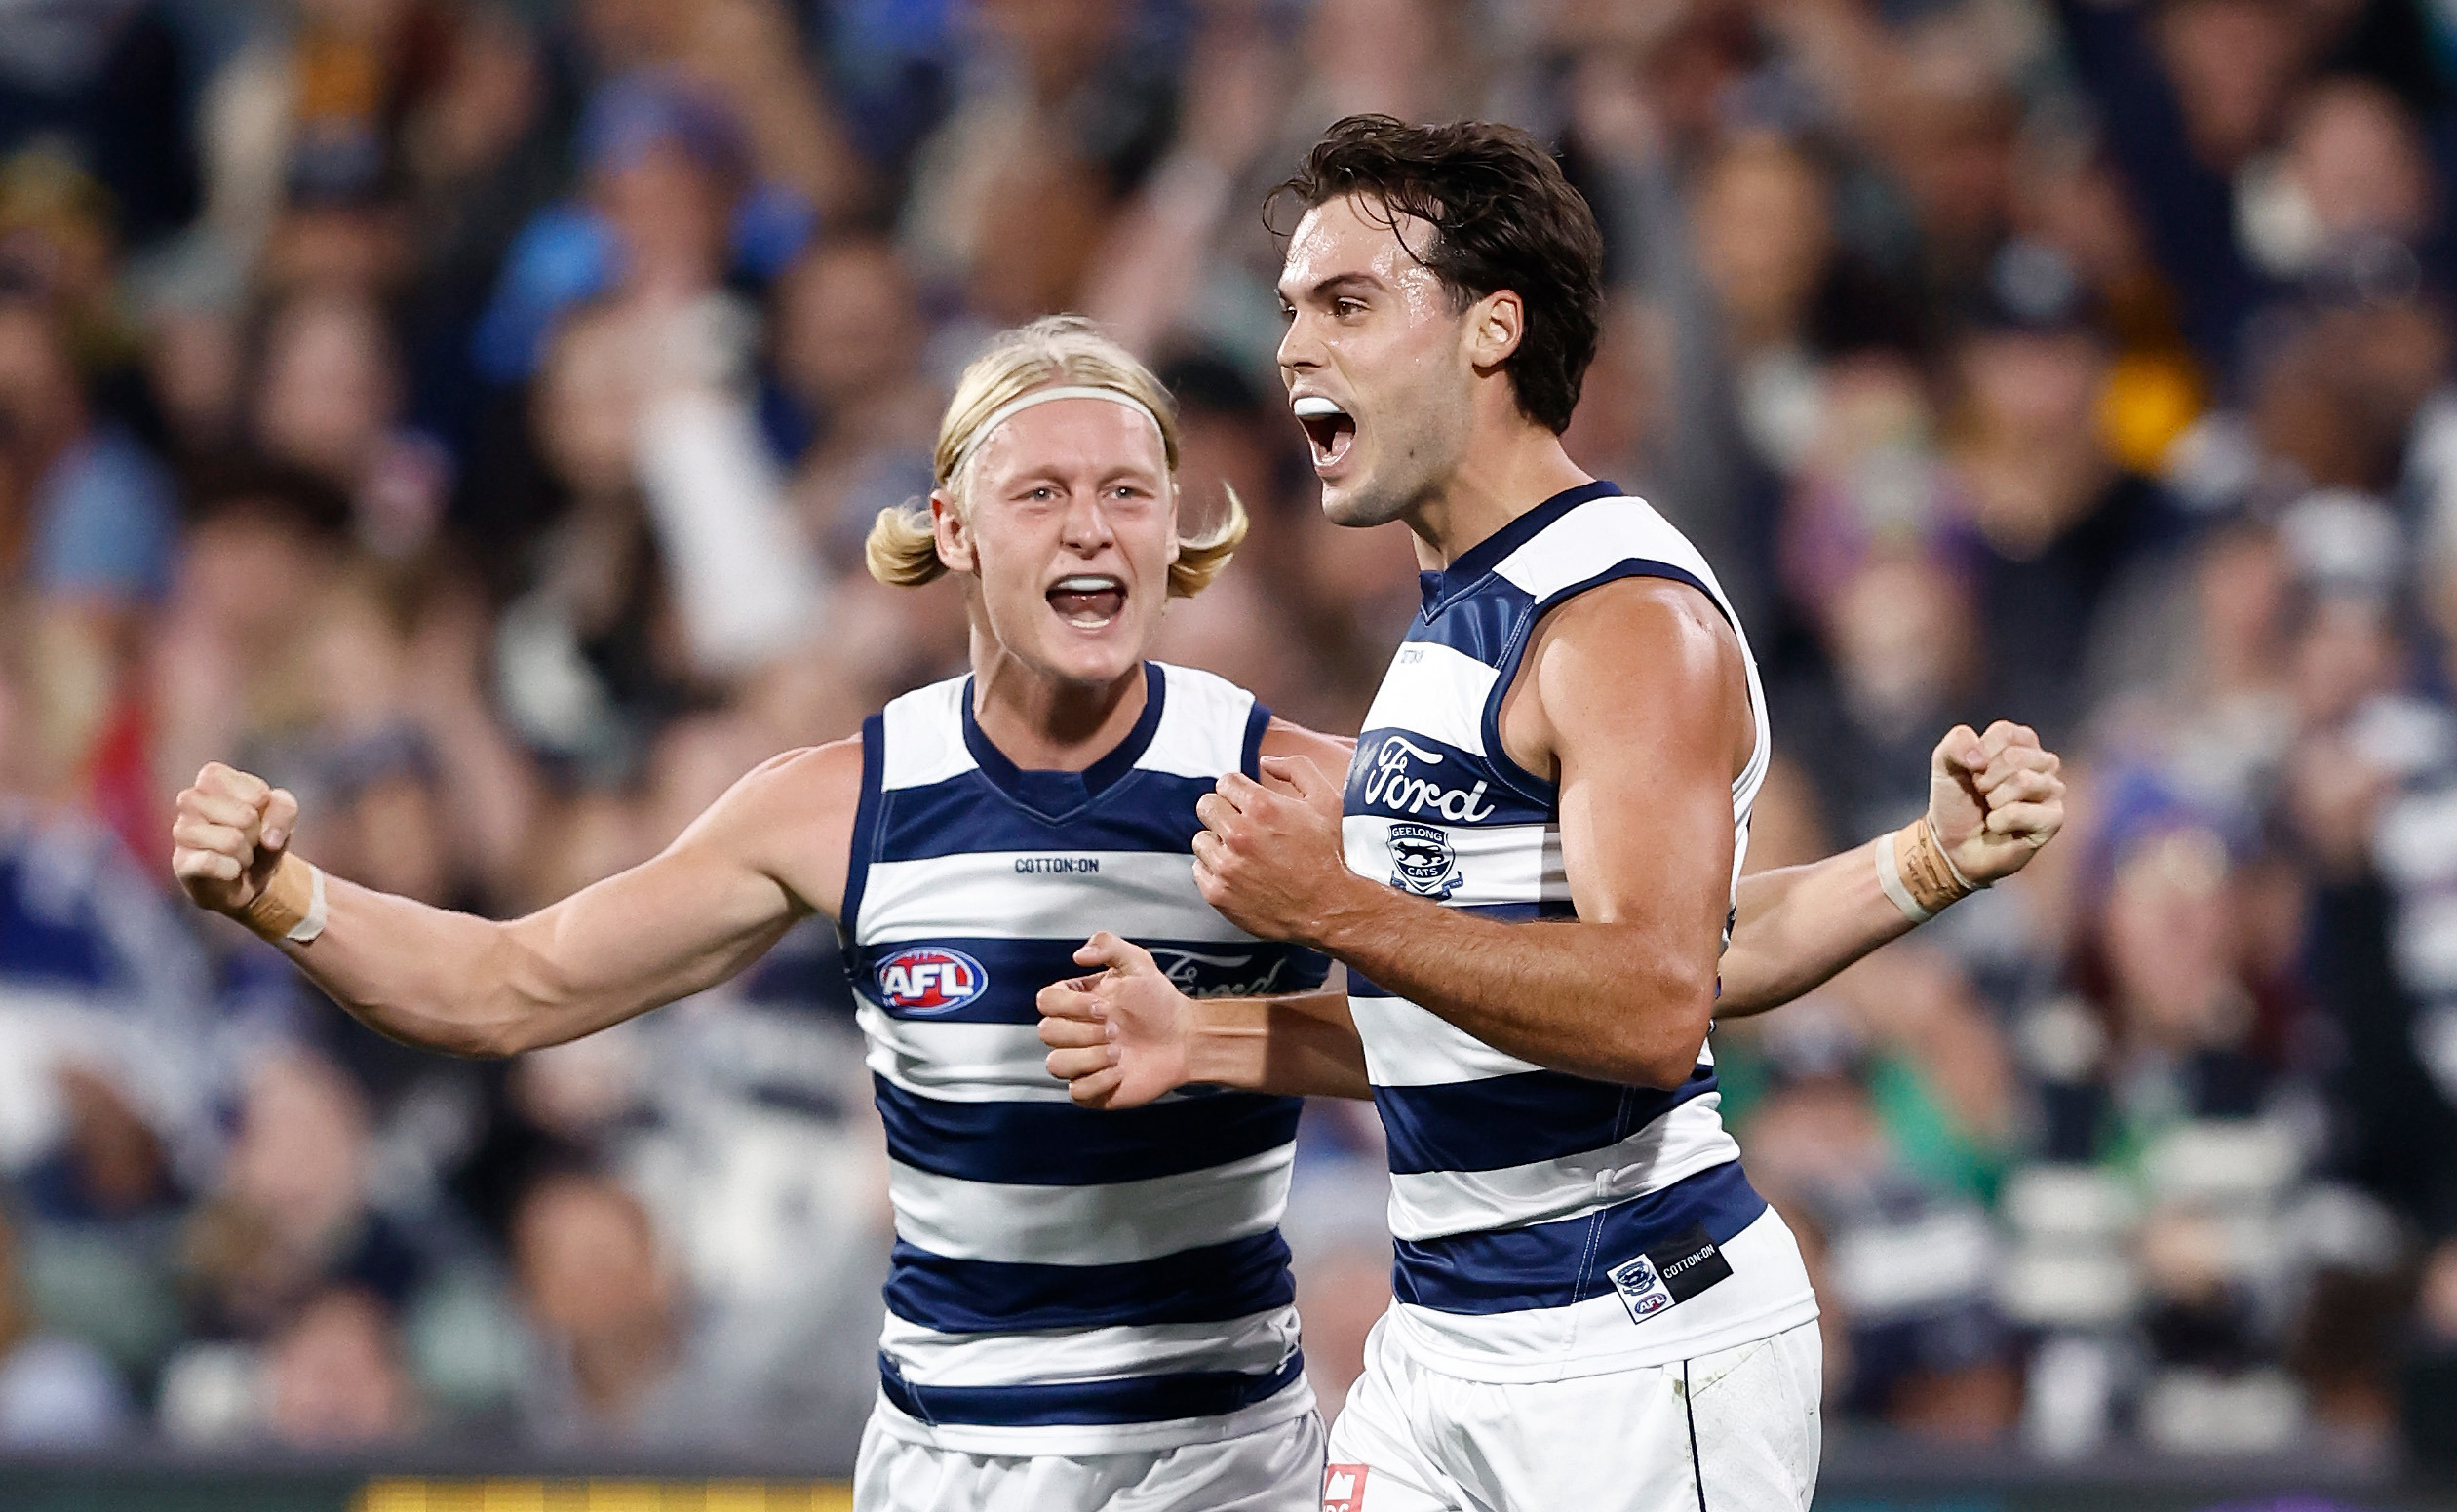 Bowes says he feels right at home with Geelong.